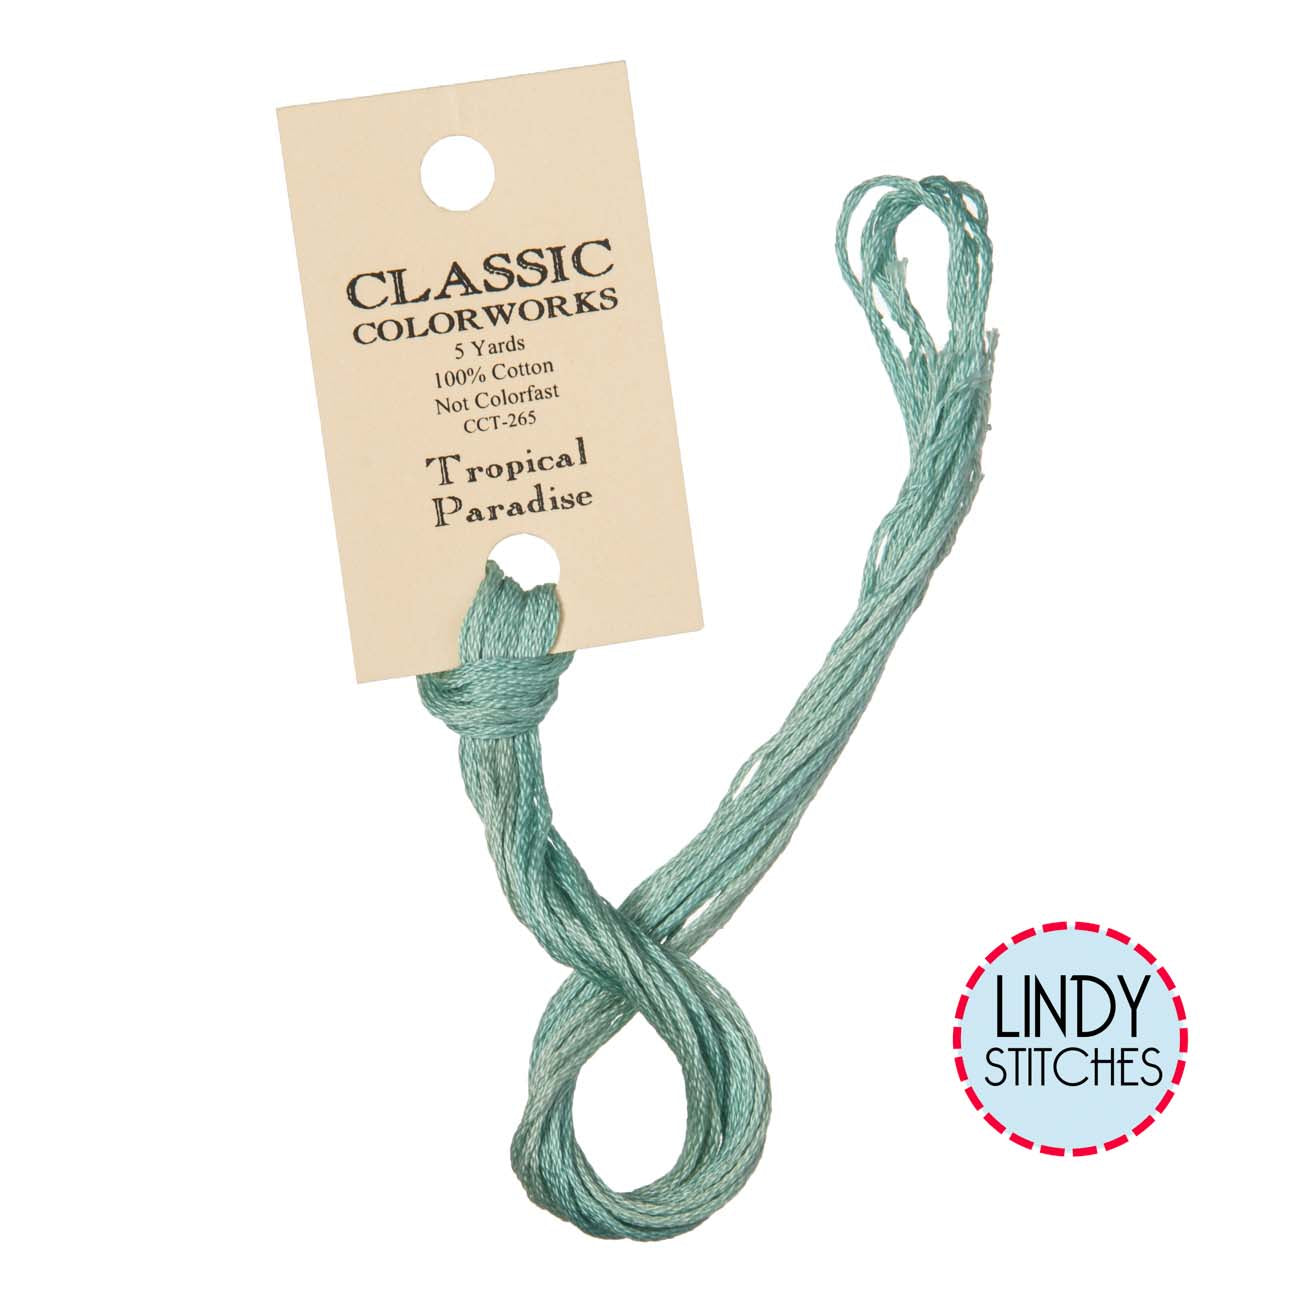 Tropical Paradise Classic Colorworks Floss Hand Dyed Cotton Skein